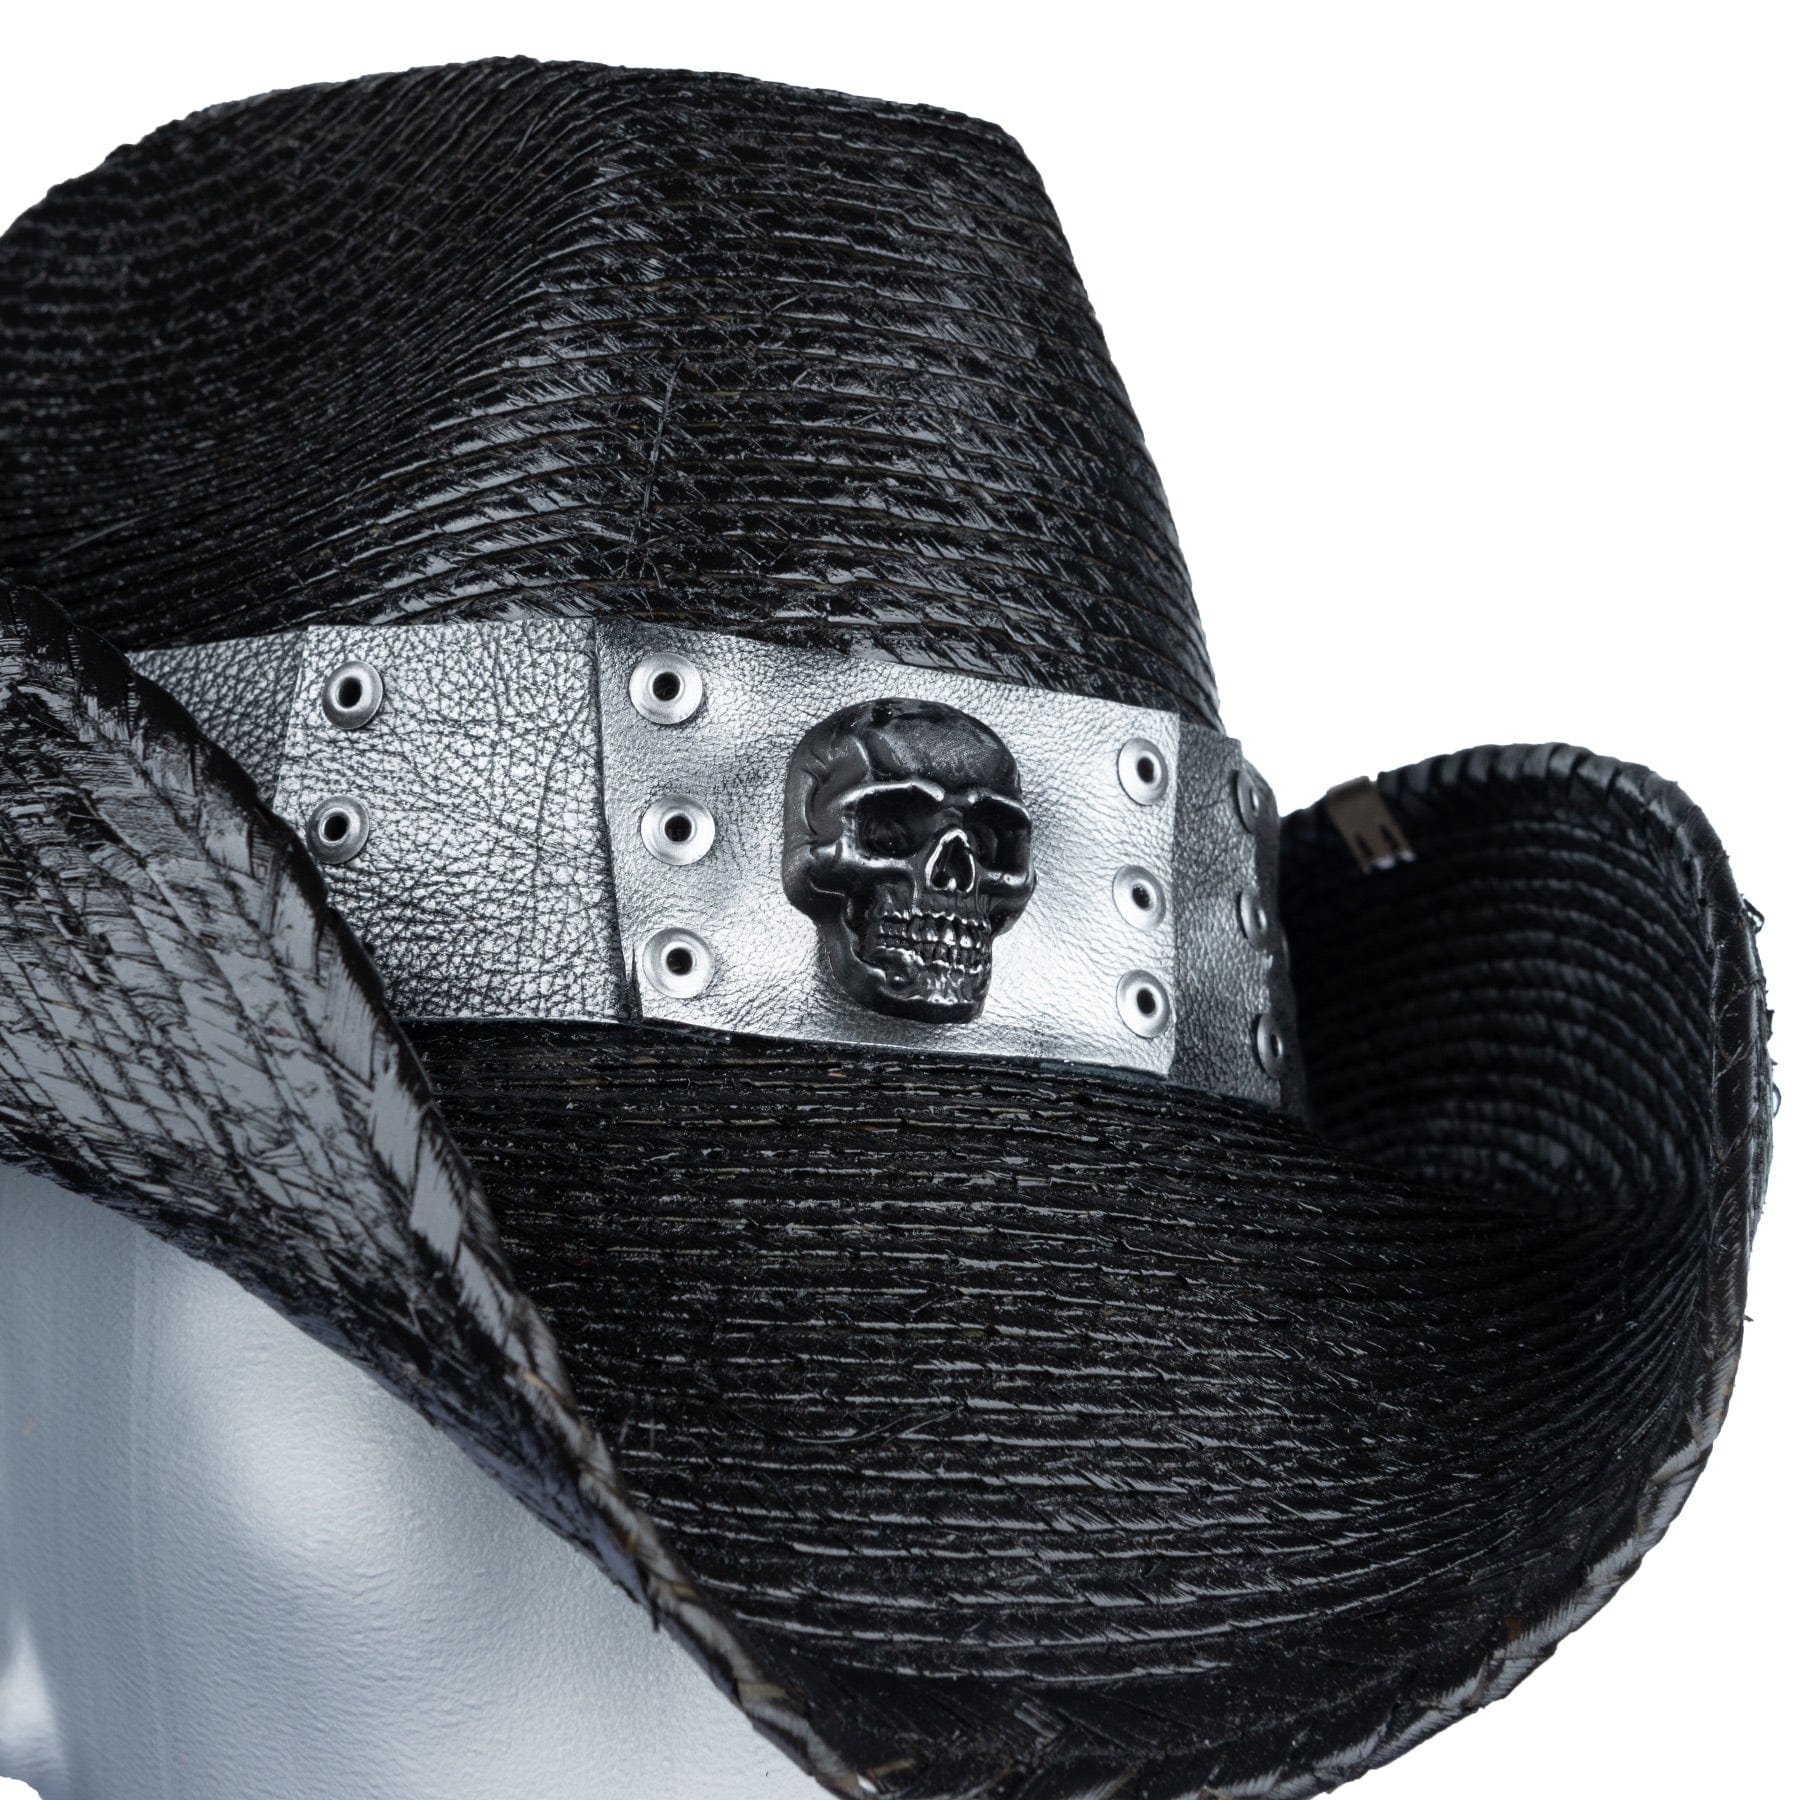 • Wornstar Custom Handmade, Stage Wear Collection• Handmade, leather hatband (hatband only)• Hand-painted• Adjustable size. Ties in the back.• Designed, made, and sold exclusively by Wornstar Clothing• Handmade at the time of order• Designed, made, and sold exclusively by Wornstar Clothing• Made with upcycled leather• 